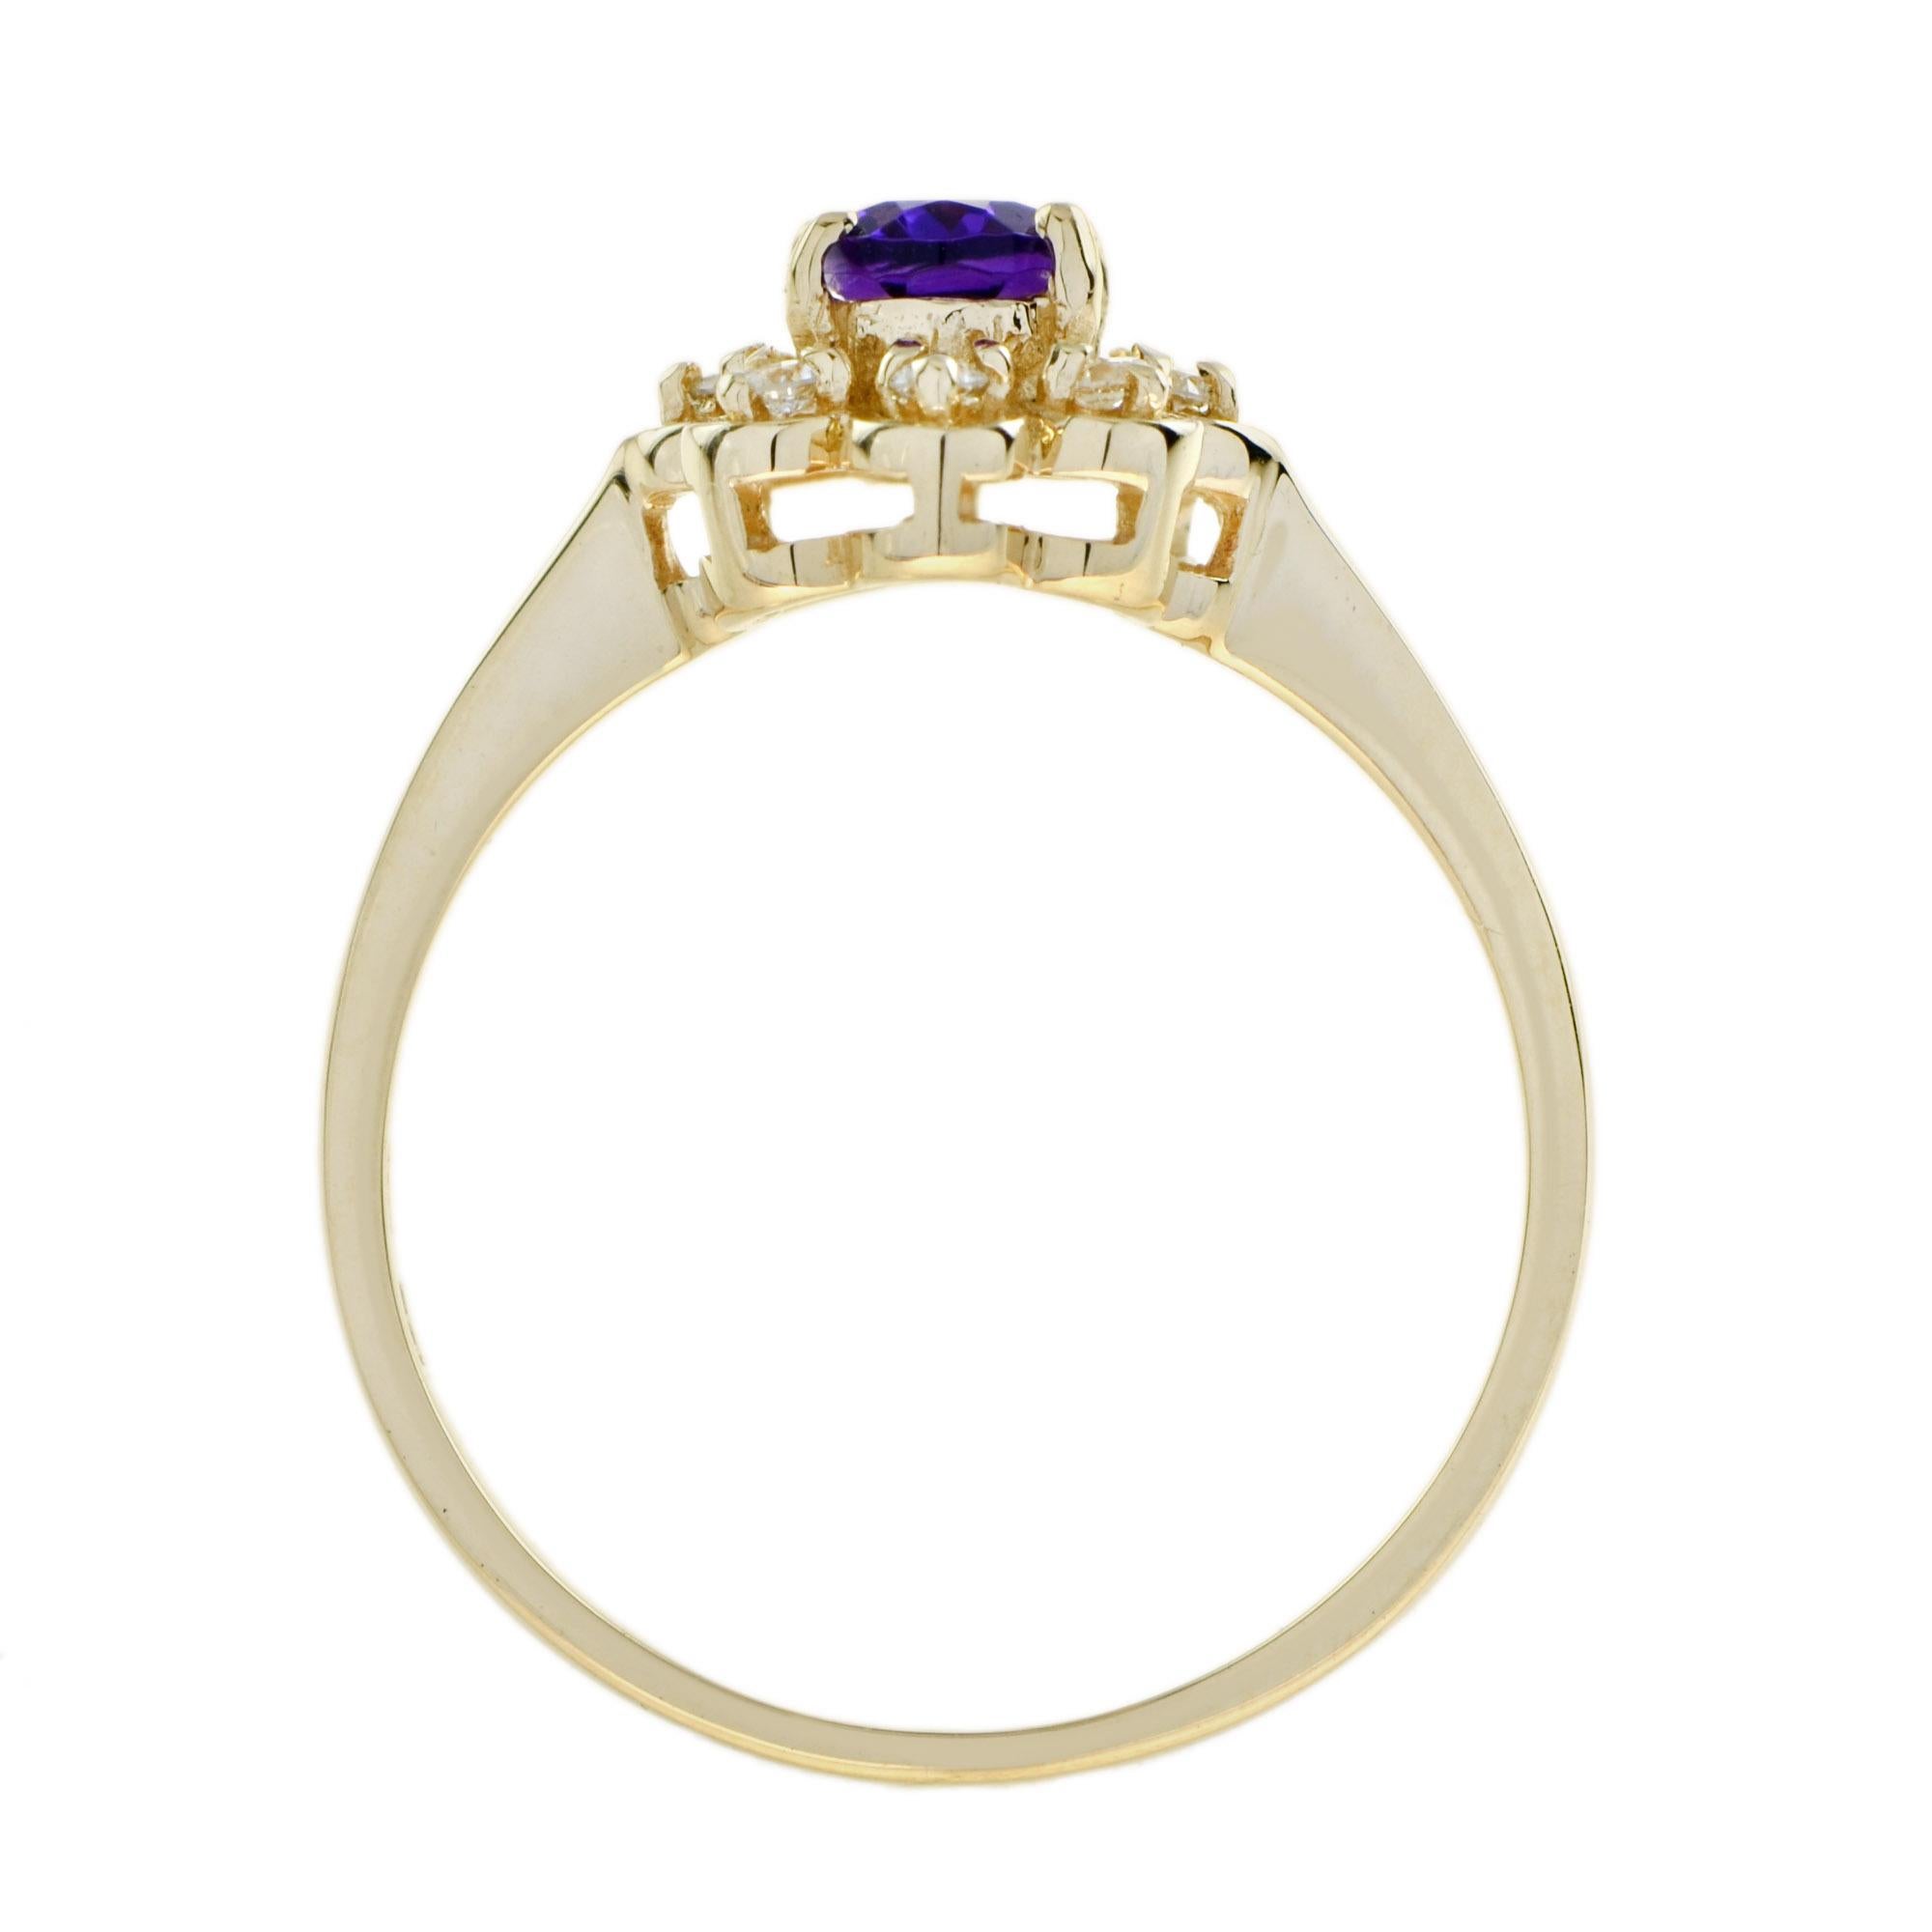 For Sale:  Vintage Style Amethyst and Diamond Halo Ring in 14K Yellow Gold 5